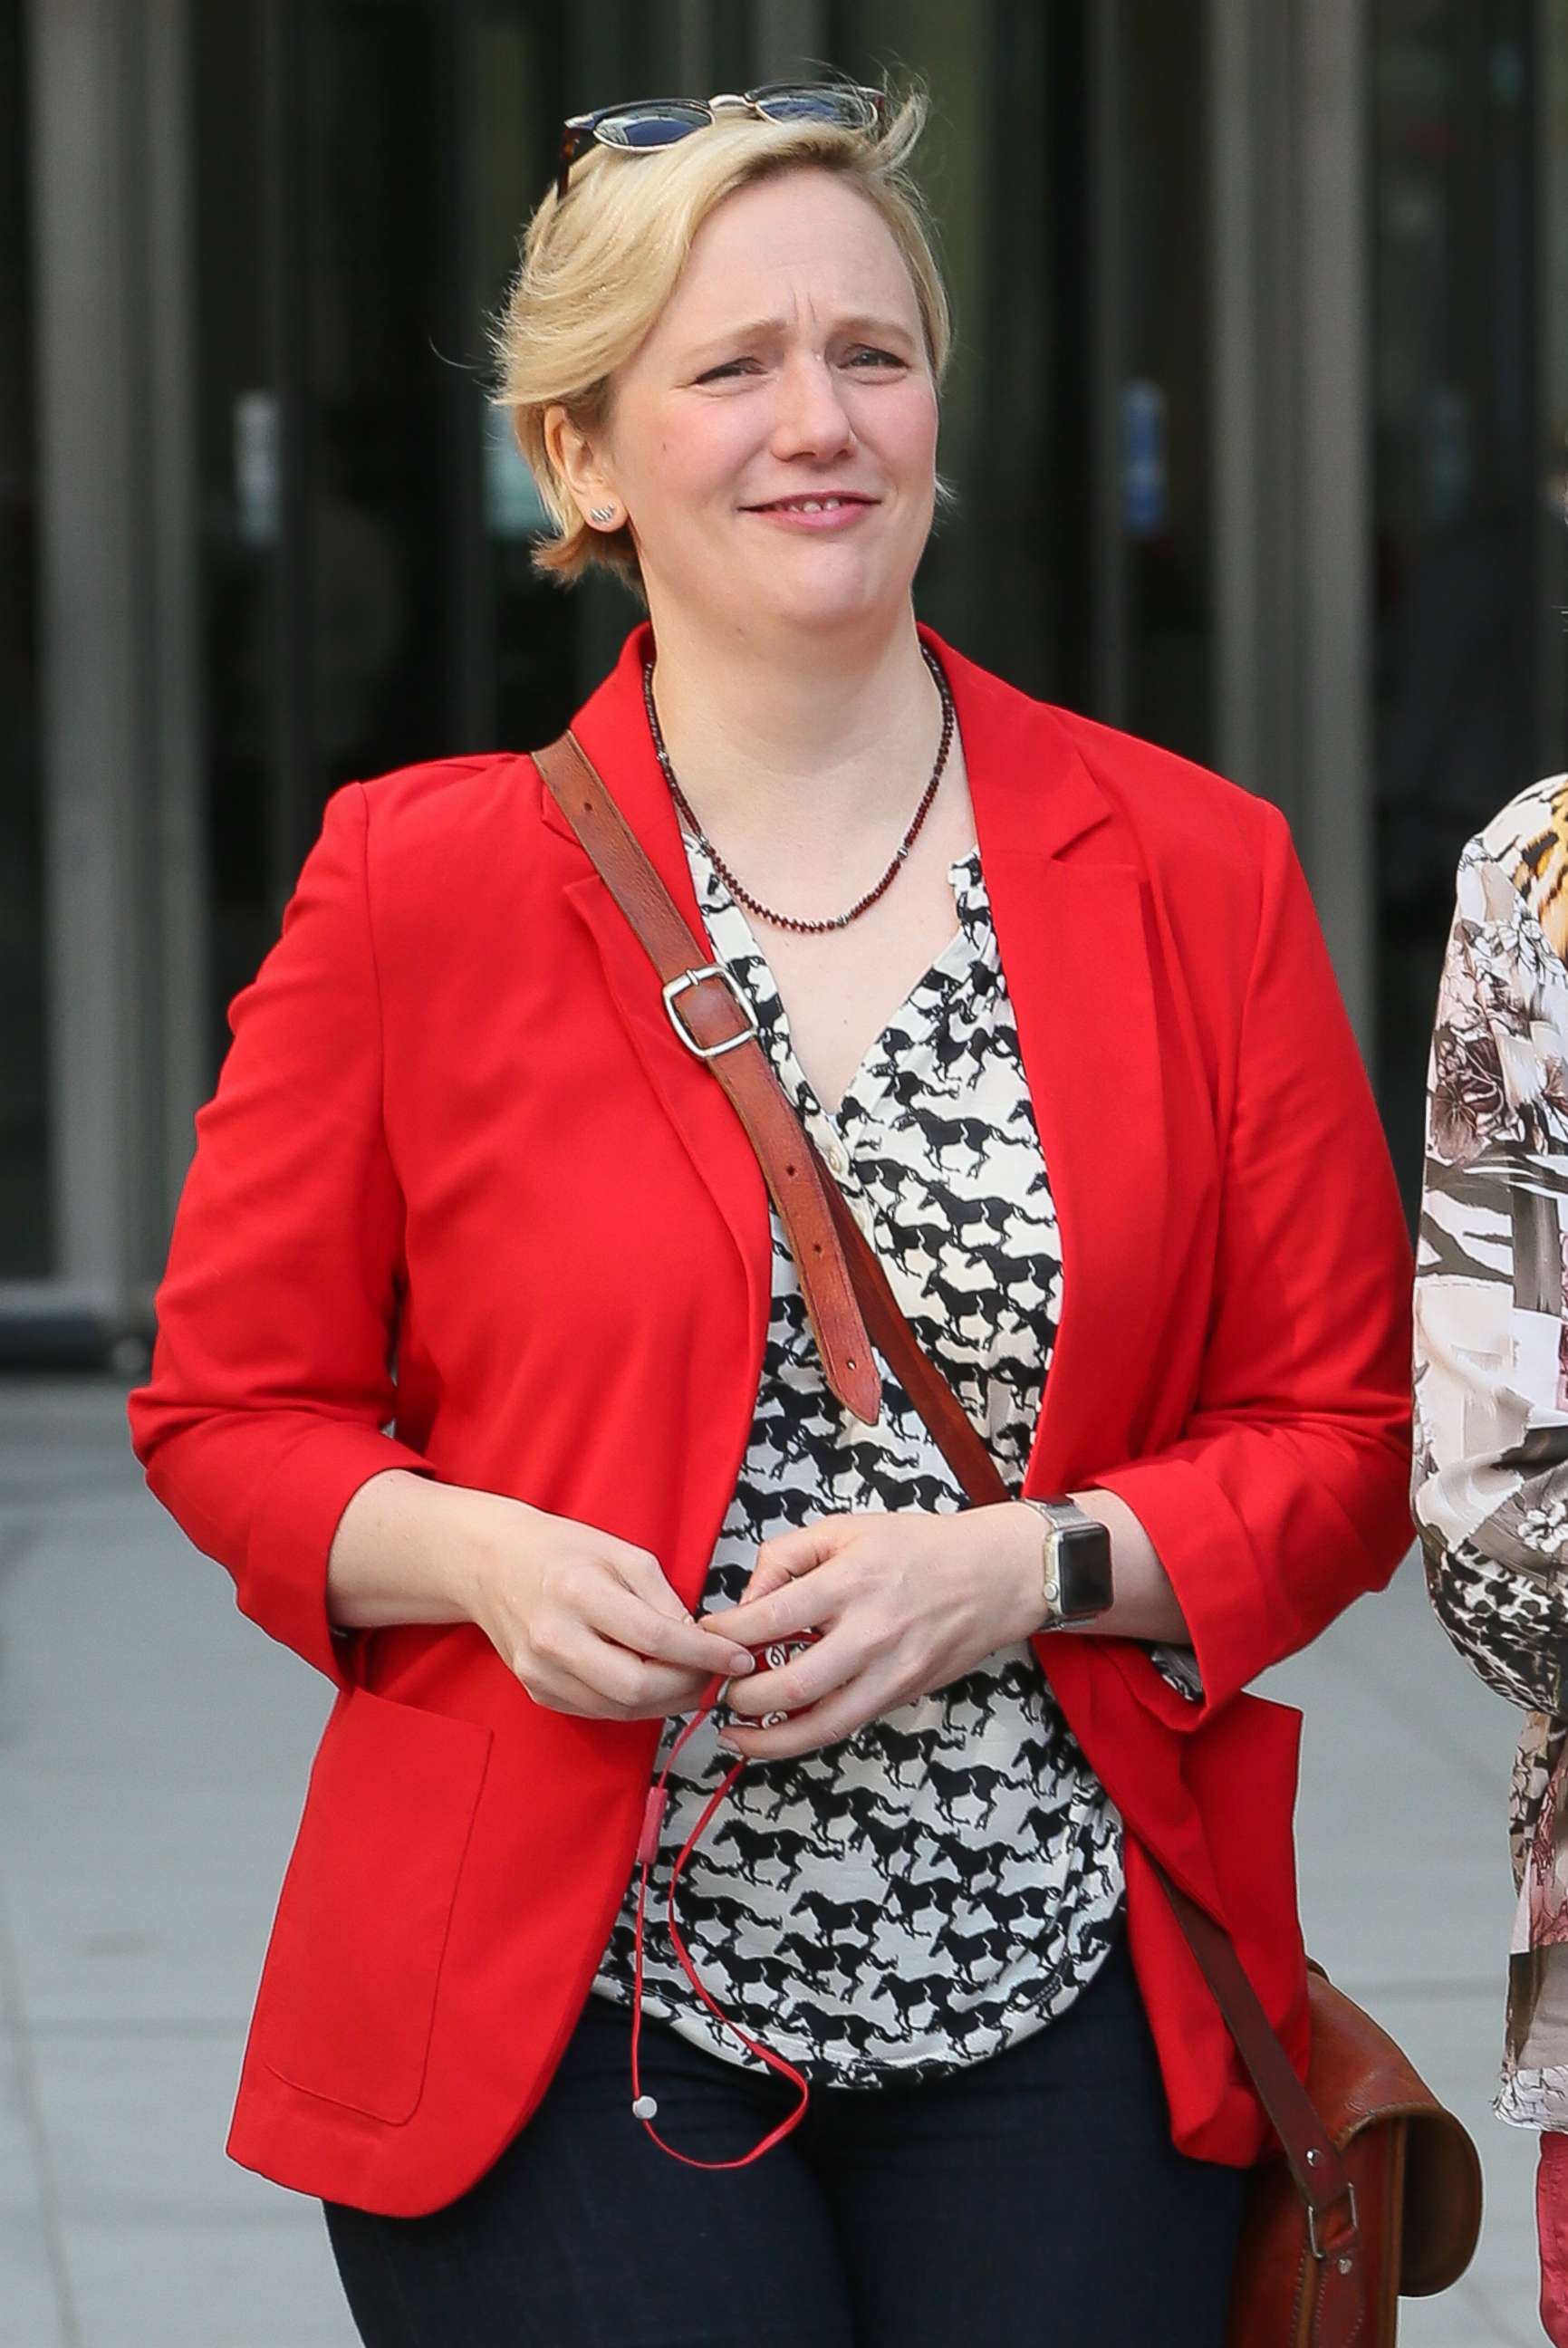 PHOTO: MP Stella Creasy leaving BBC TV studios after being interviewed about Wonga going into administration, Aug. 31, 2018, in London.